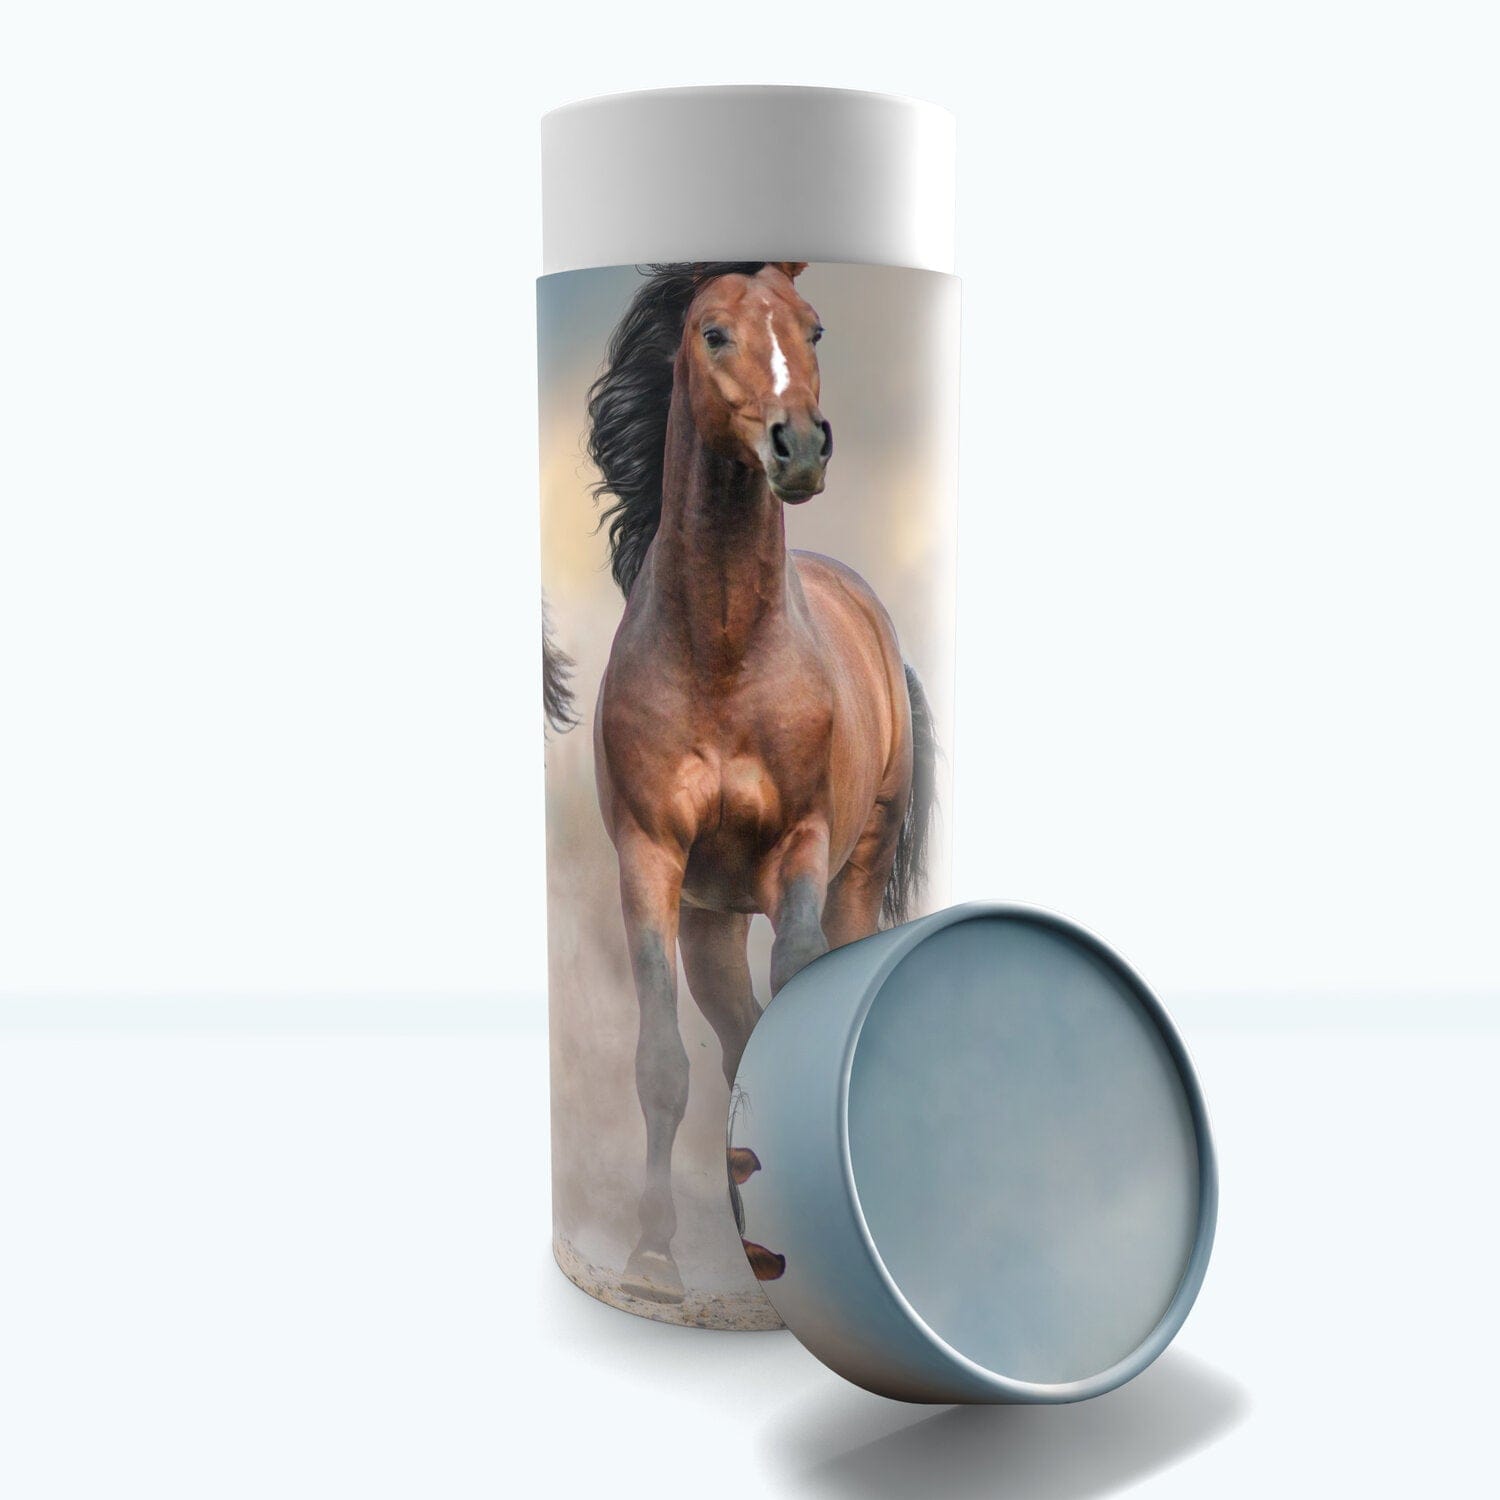 Commemorative Cremation Urns Small Wild Horses Biodegradable & Eco Friendly Burial or Scattering Urn / Tube